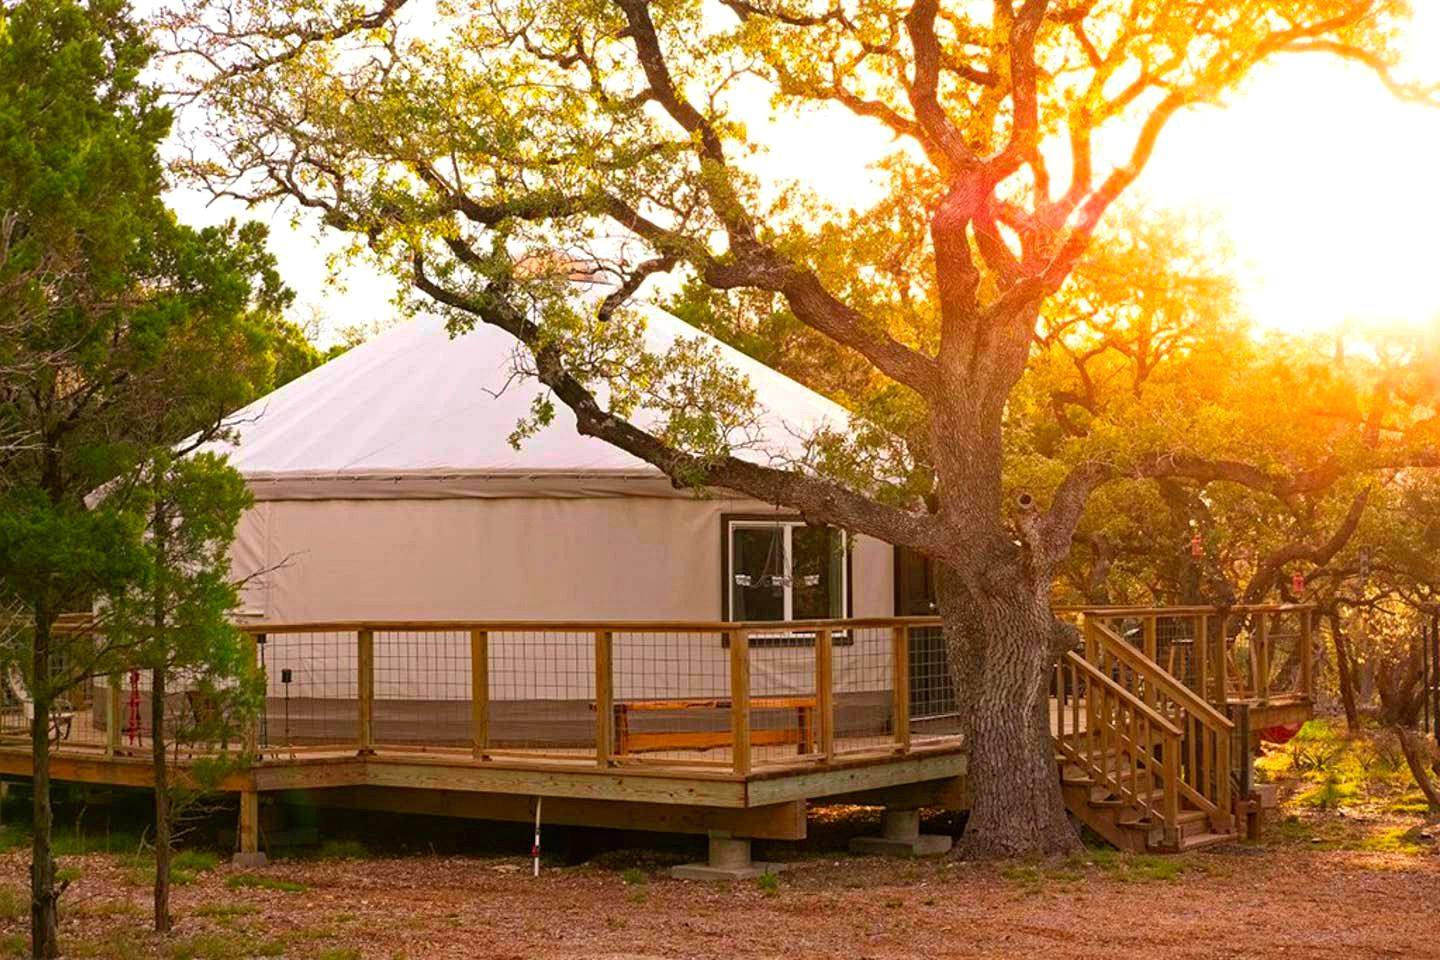 5 Glamping Sites to Visit After Seeing “Amanda and Jack Go Glamping”